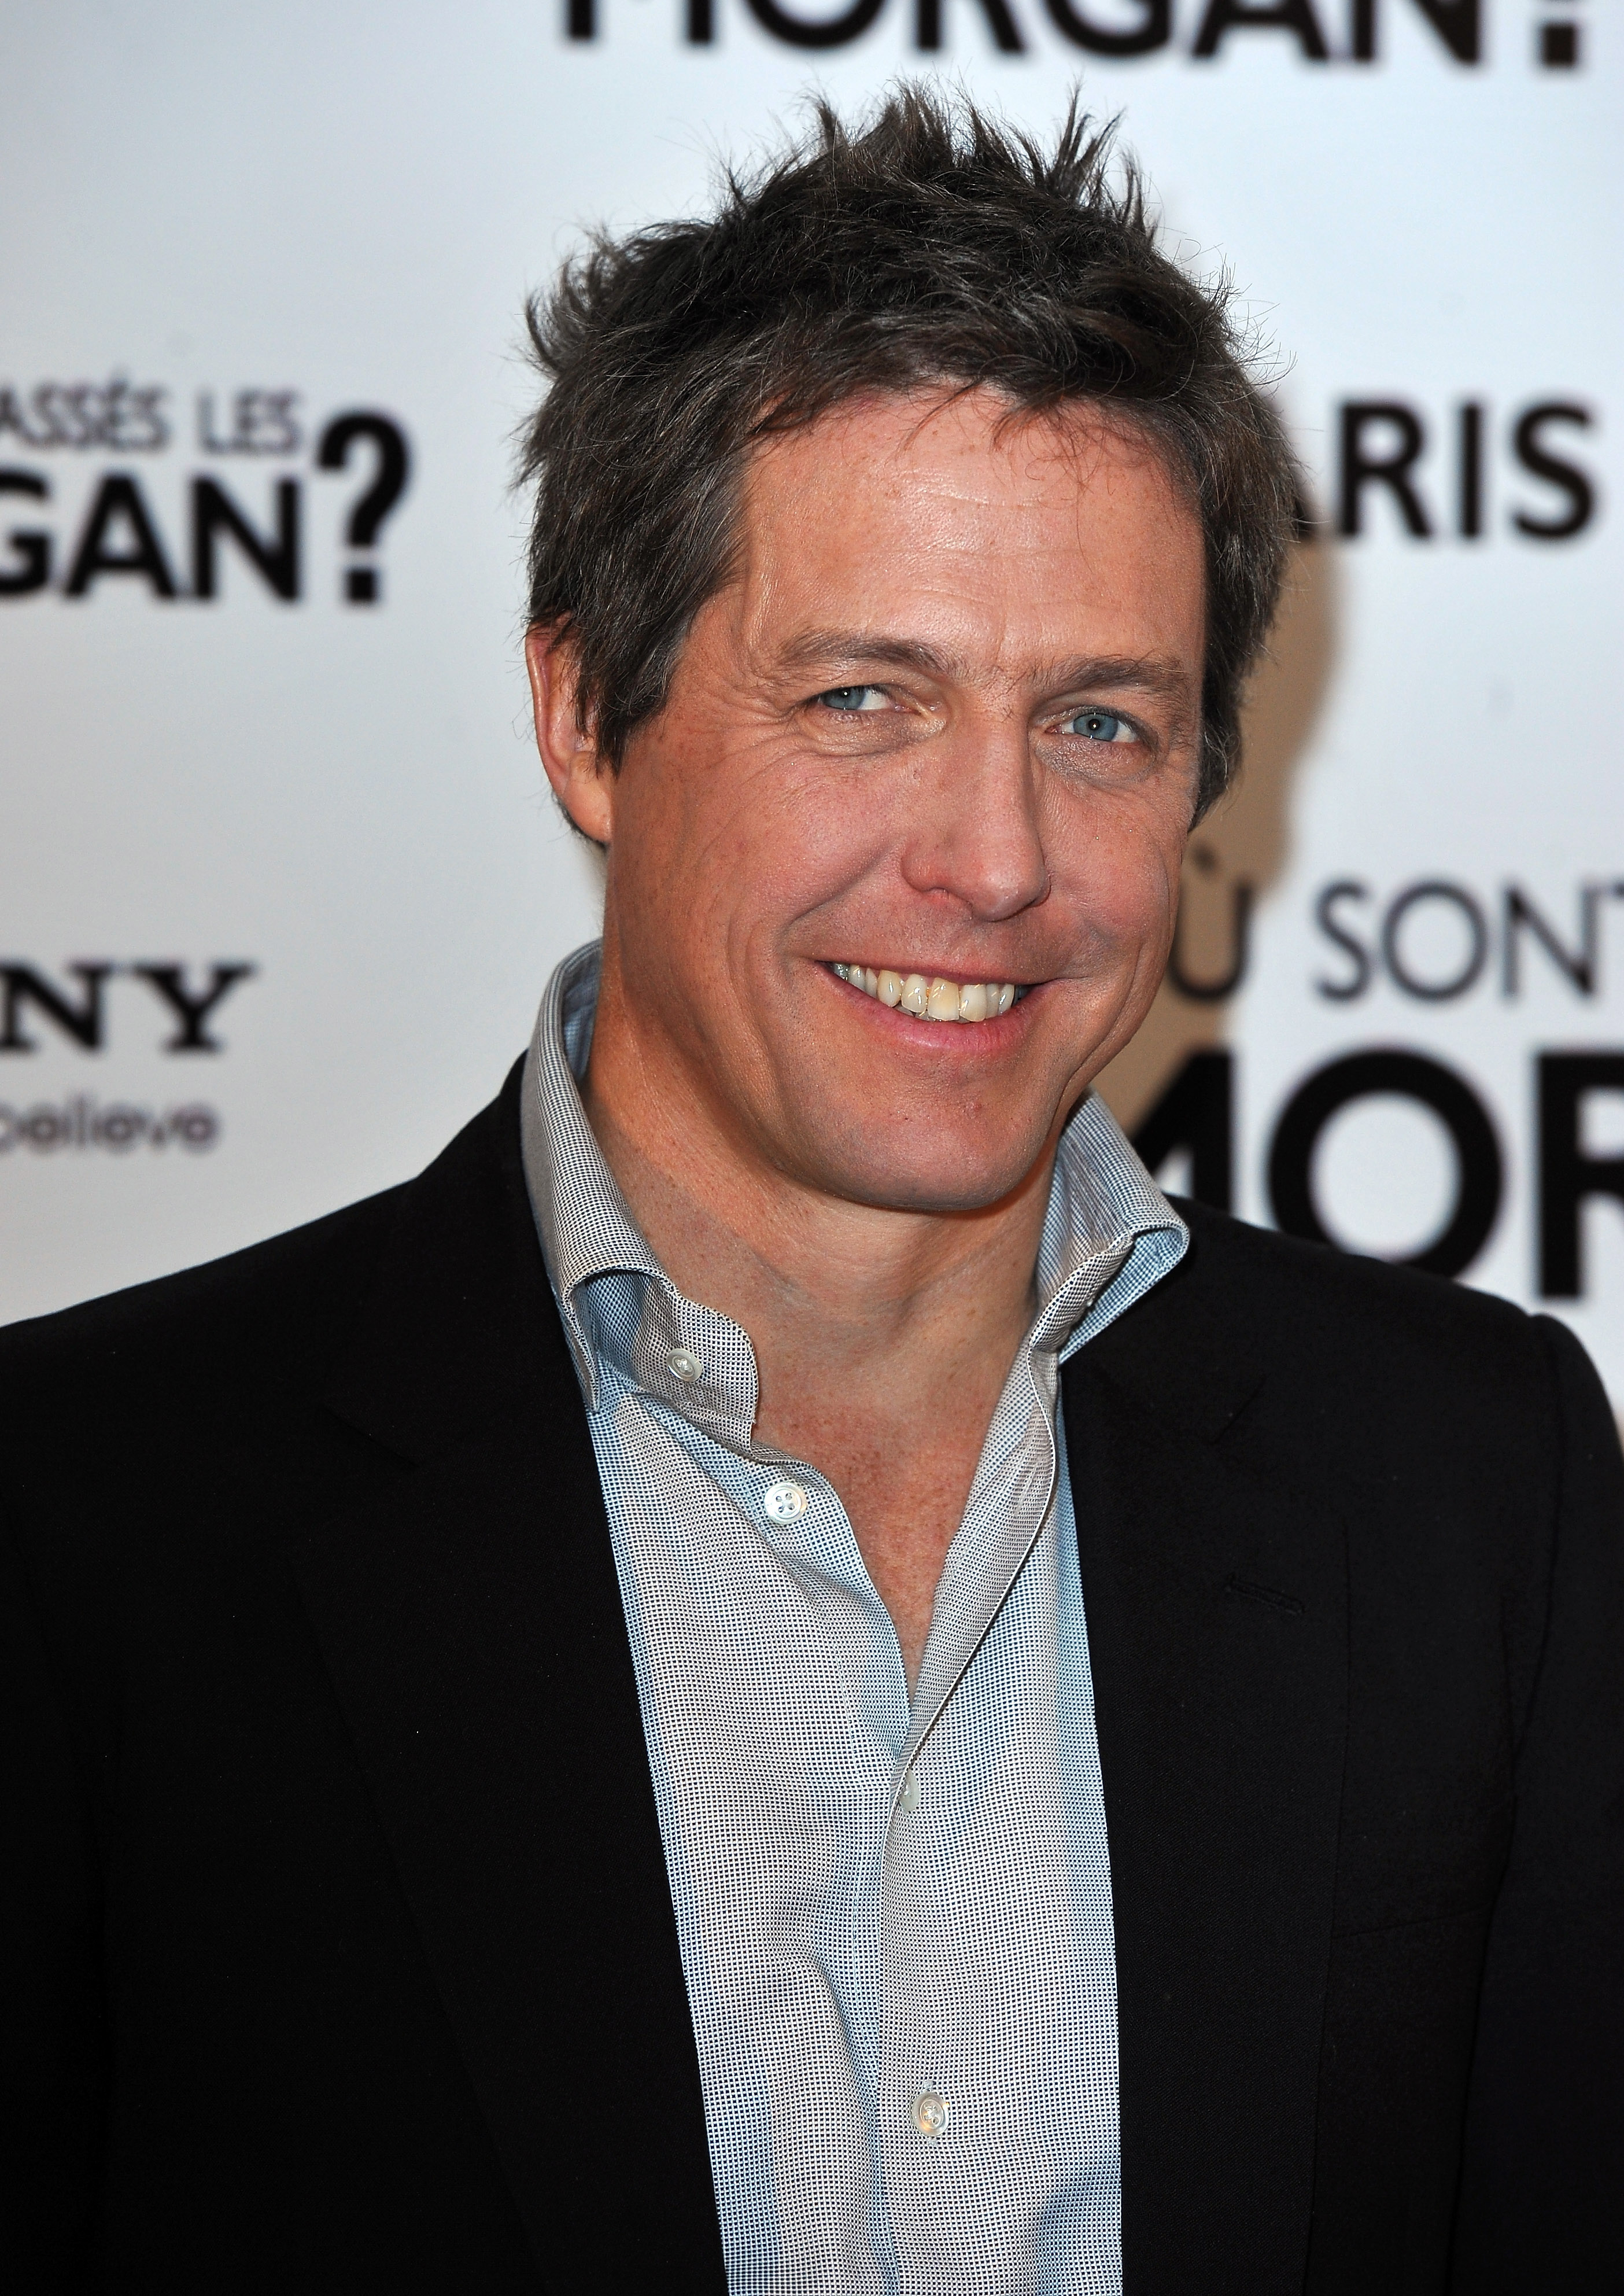 Hugh Grant wearing a dark jacket and light shirt, smiling at an event